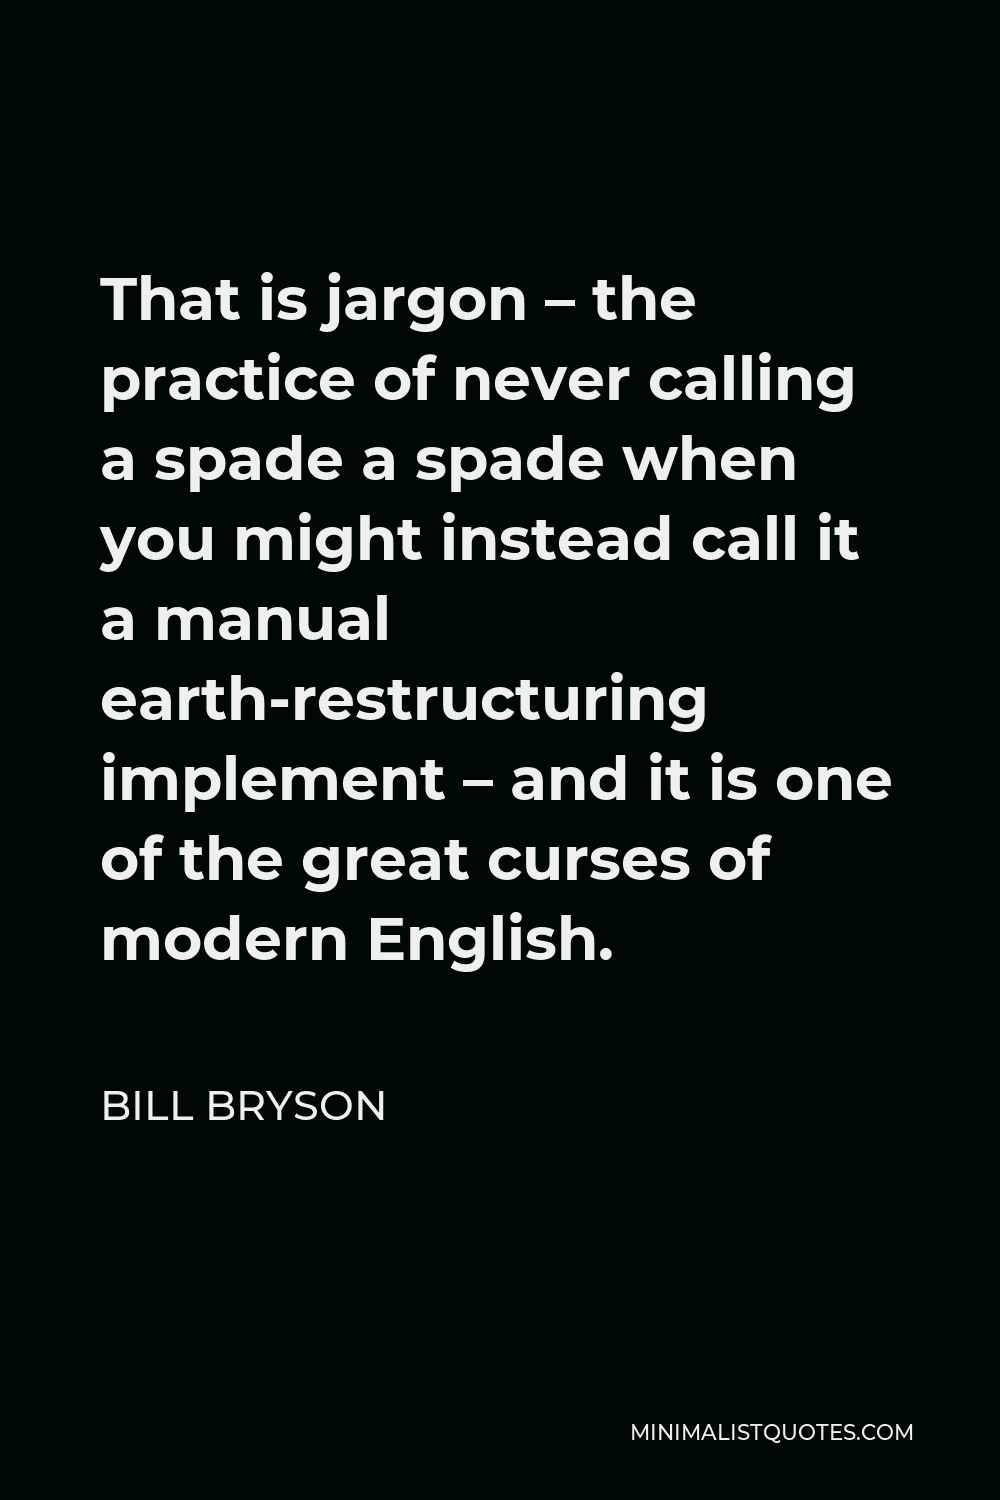 Bill Bryson Quote - That is jargon – the practice of never calling a spade a spade when you might instead call it a manual earth-restructuring implement – and it is one of the great curses of modern English.